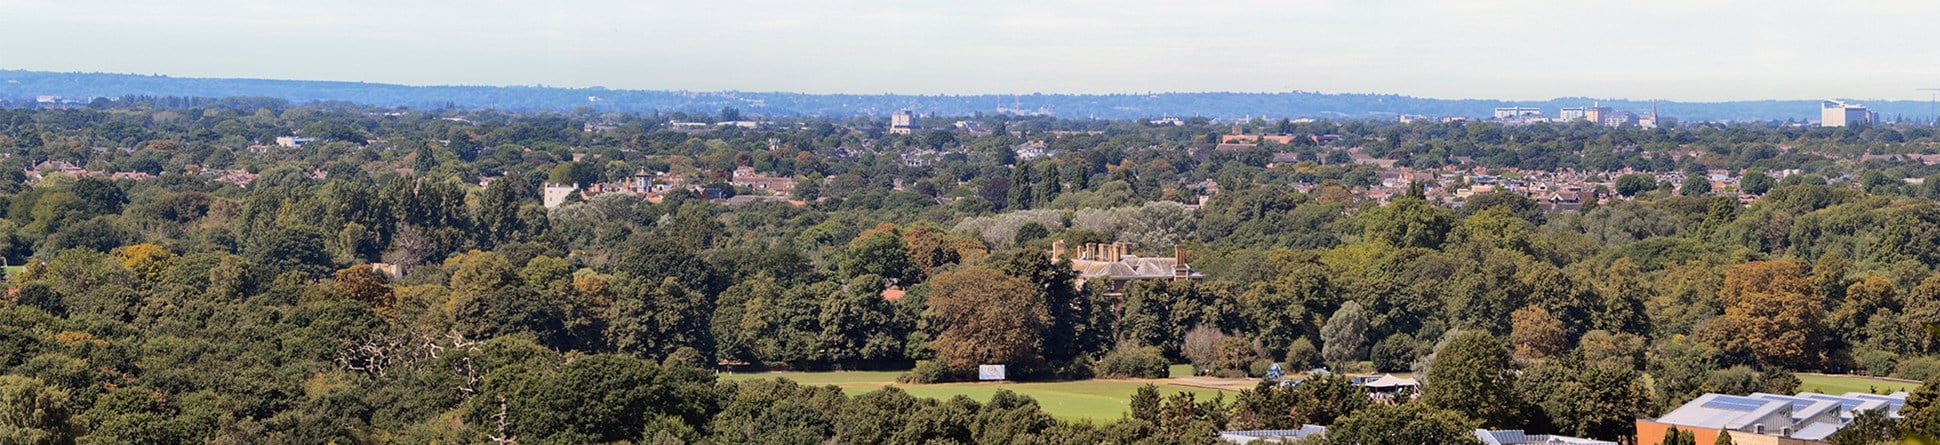 Panoramic view of King Henry's Mound